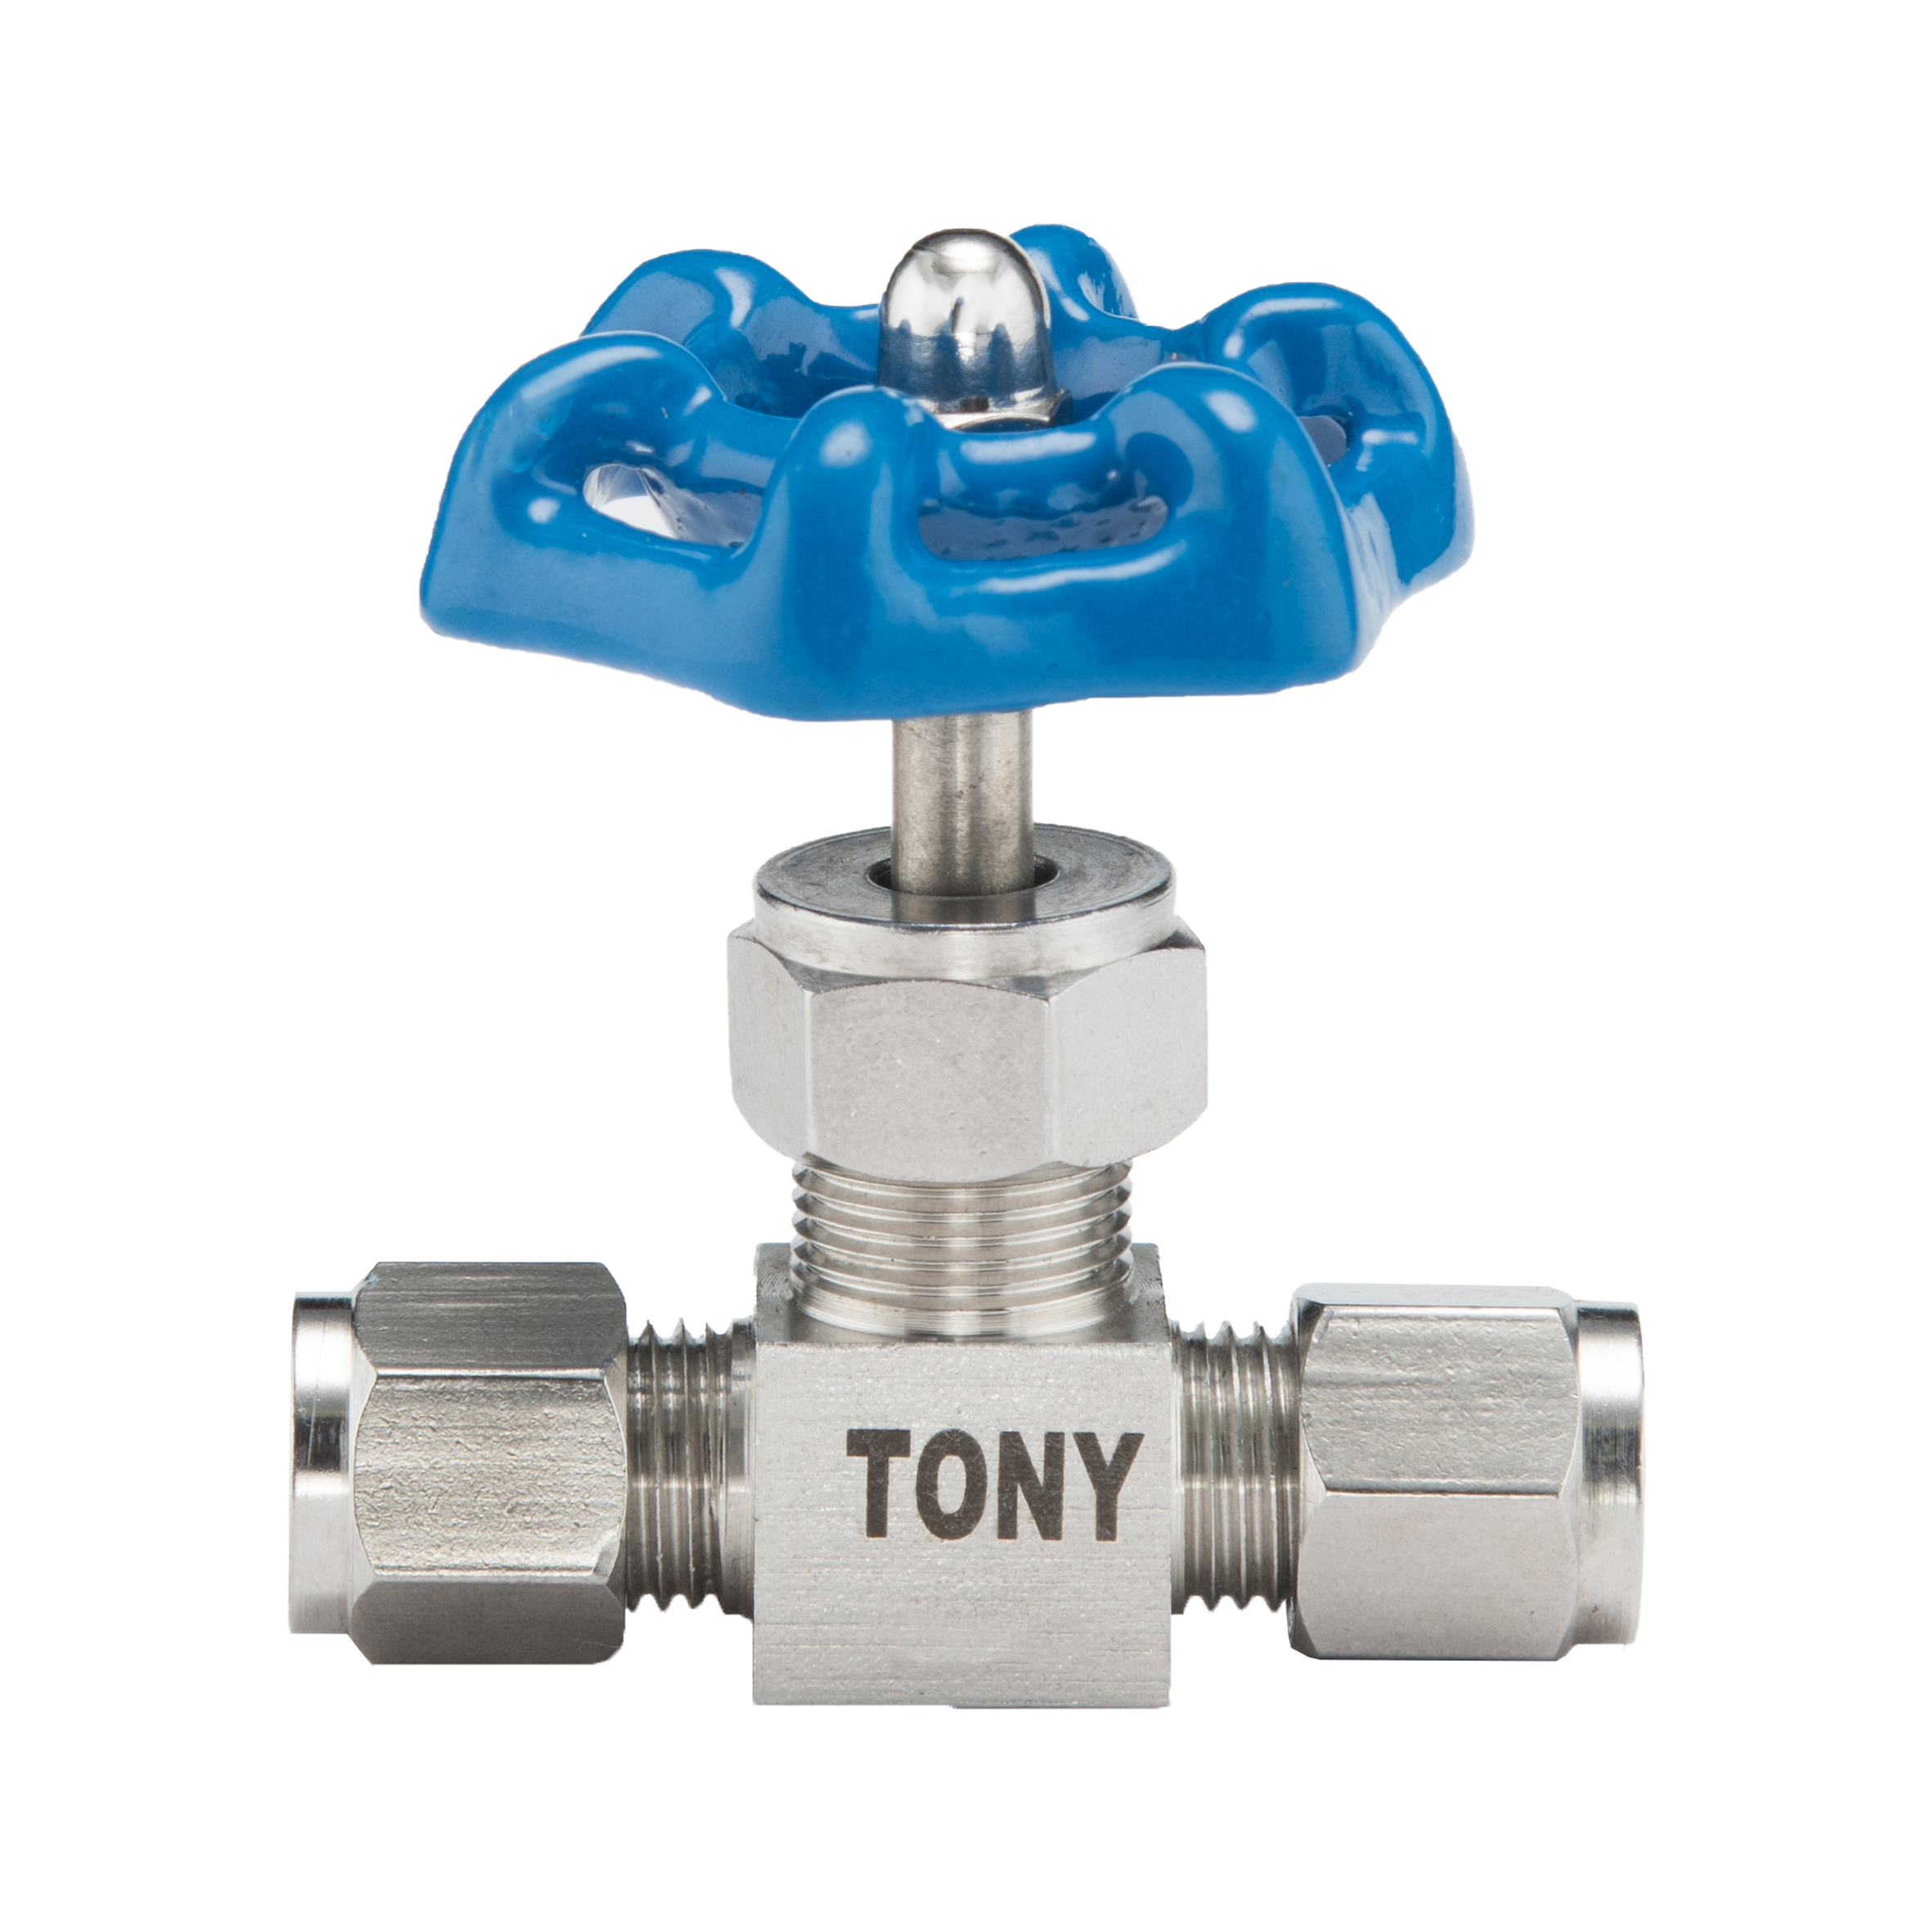 How Do Stainless Steel Needle valves Work And Apply?